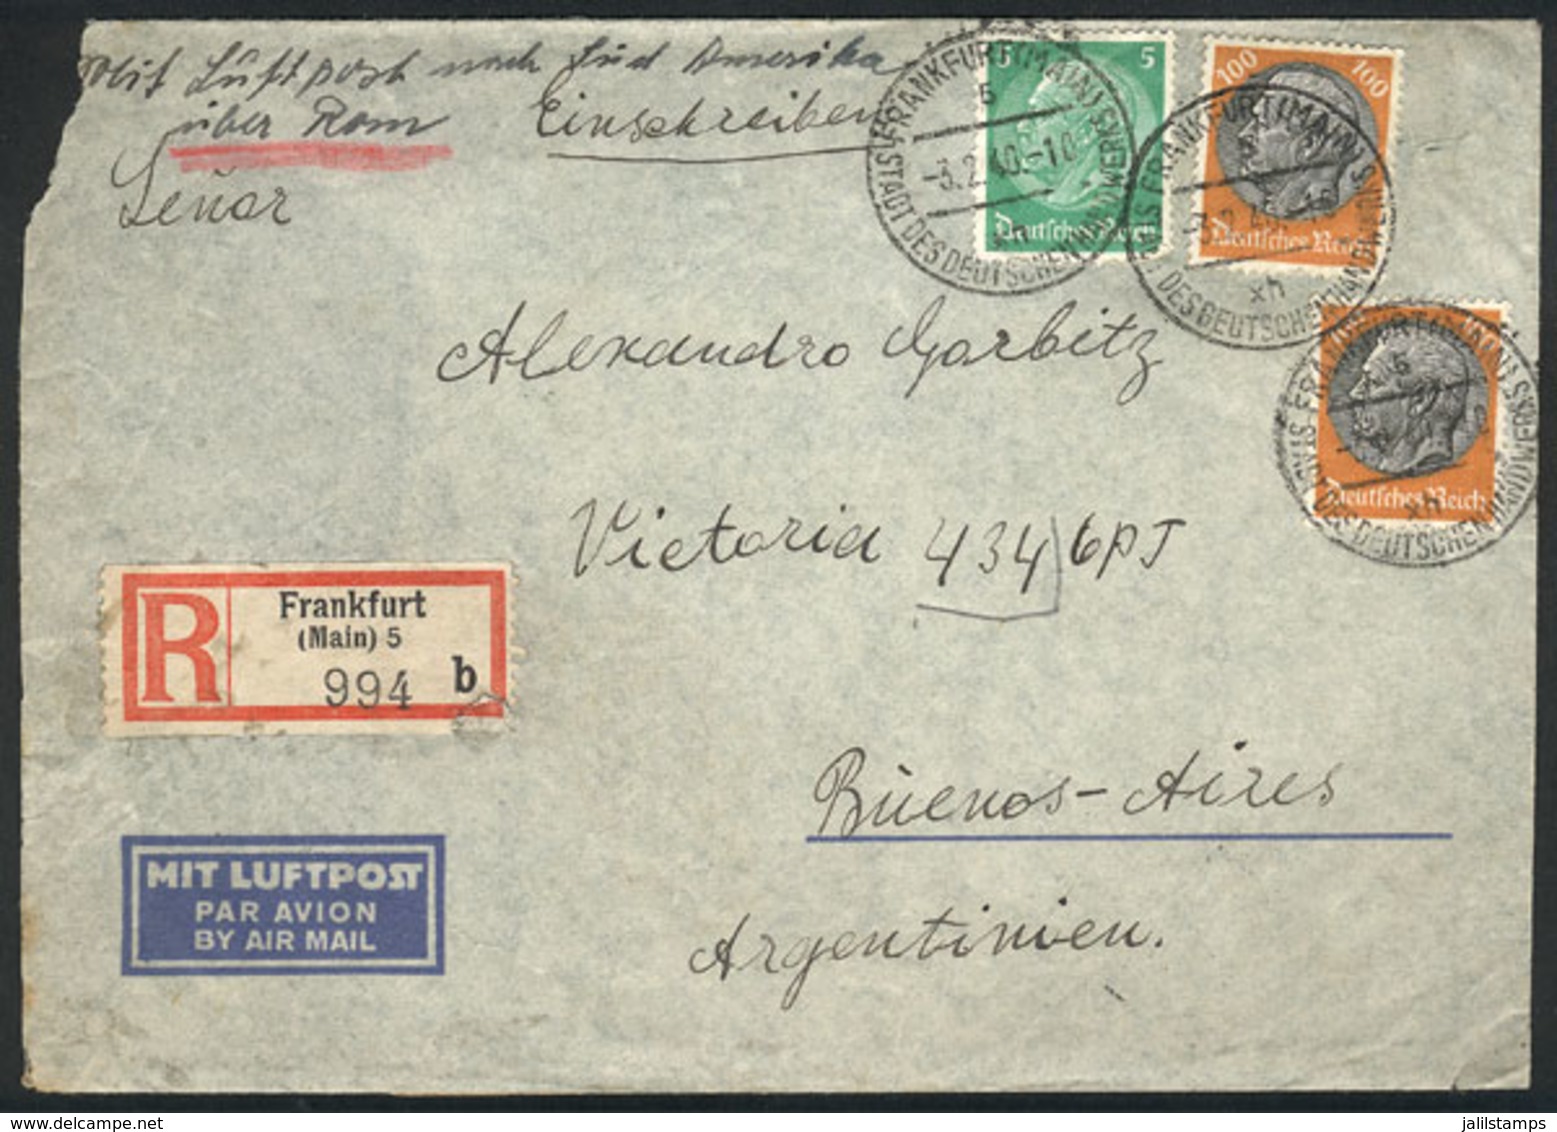 GERMANY: Registered Airmail Cover (with Original Letter Included) Sent From Frankfurt To Buenos Aires On 3/FE/1940, Fran - Prefilatelia